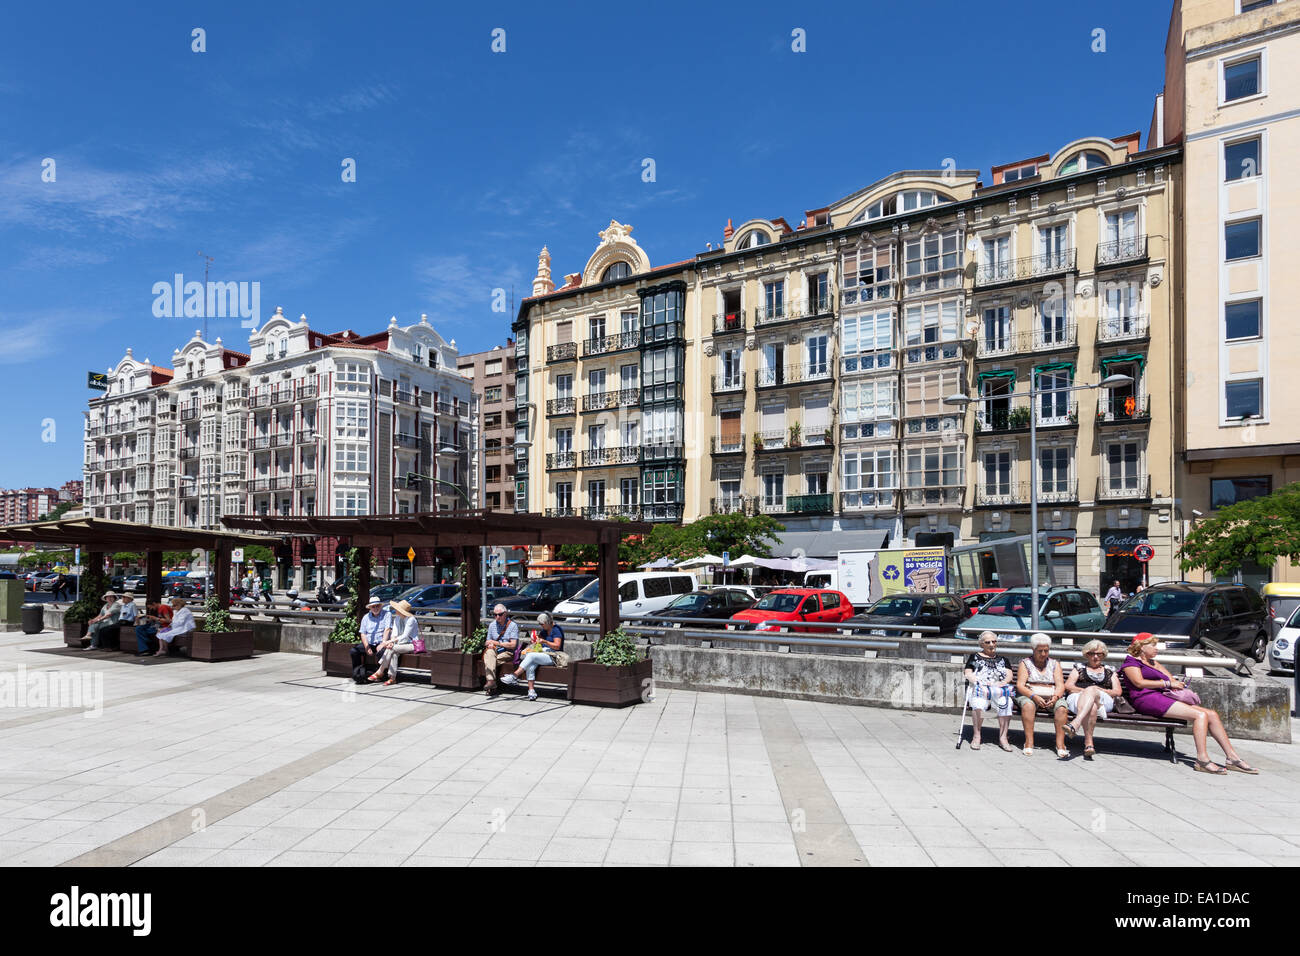 People on the Promenade in Santander, Cantabria, Spain Stock Photo